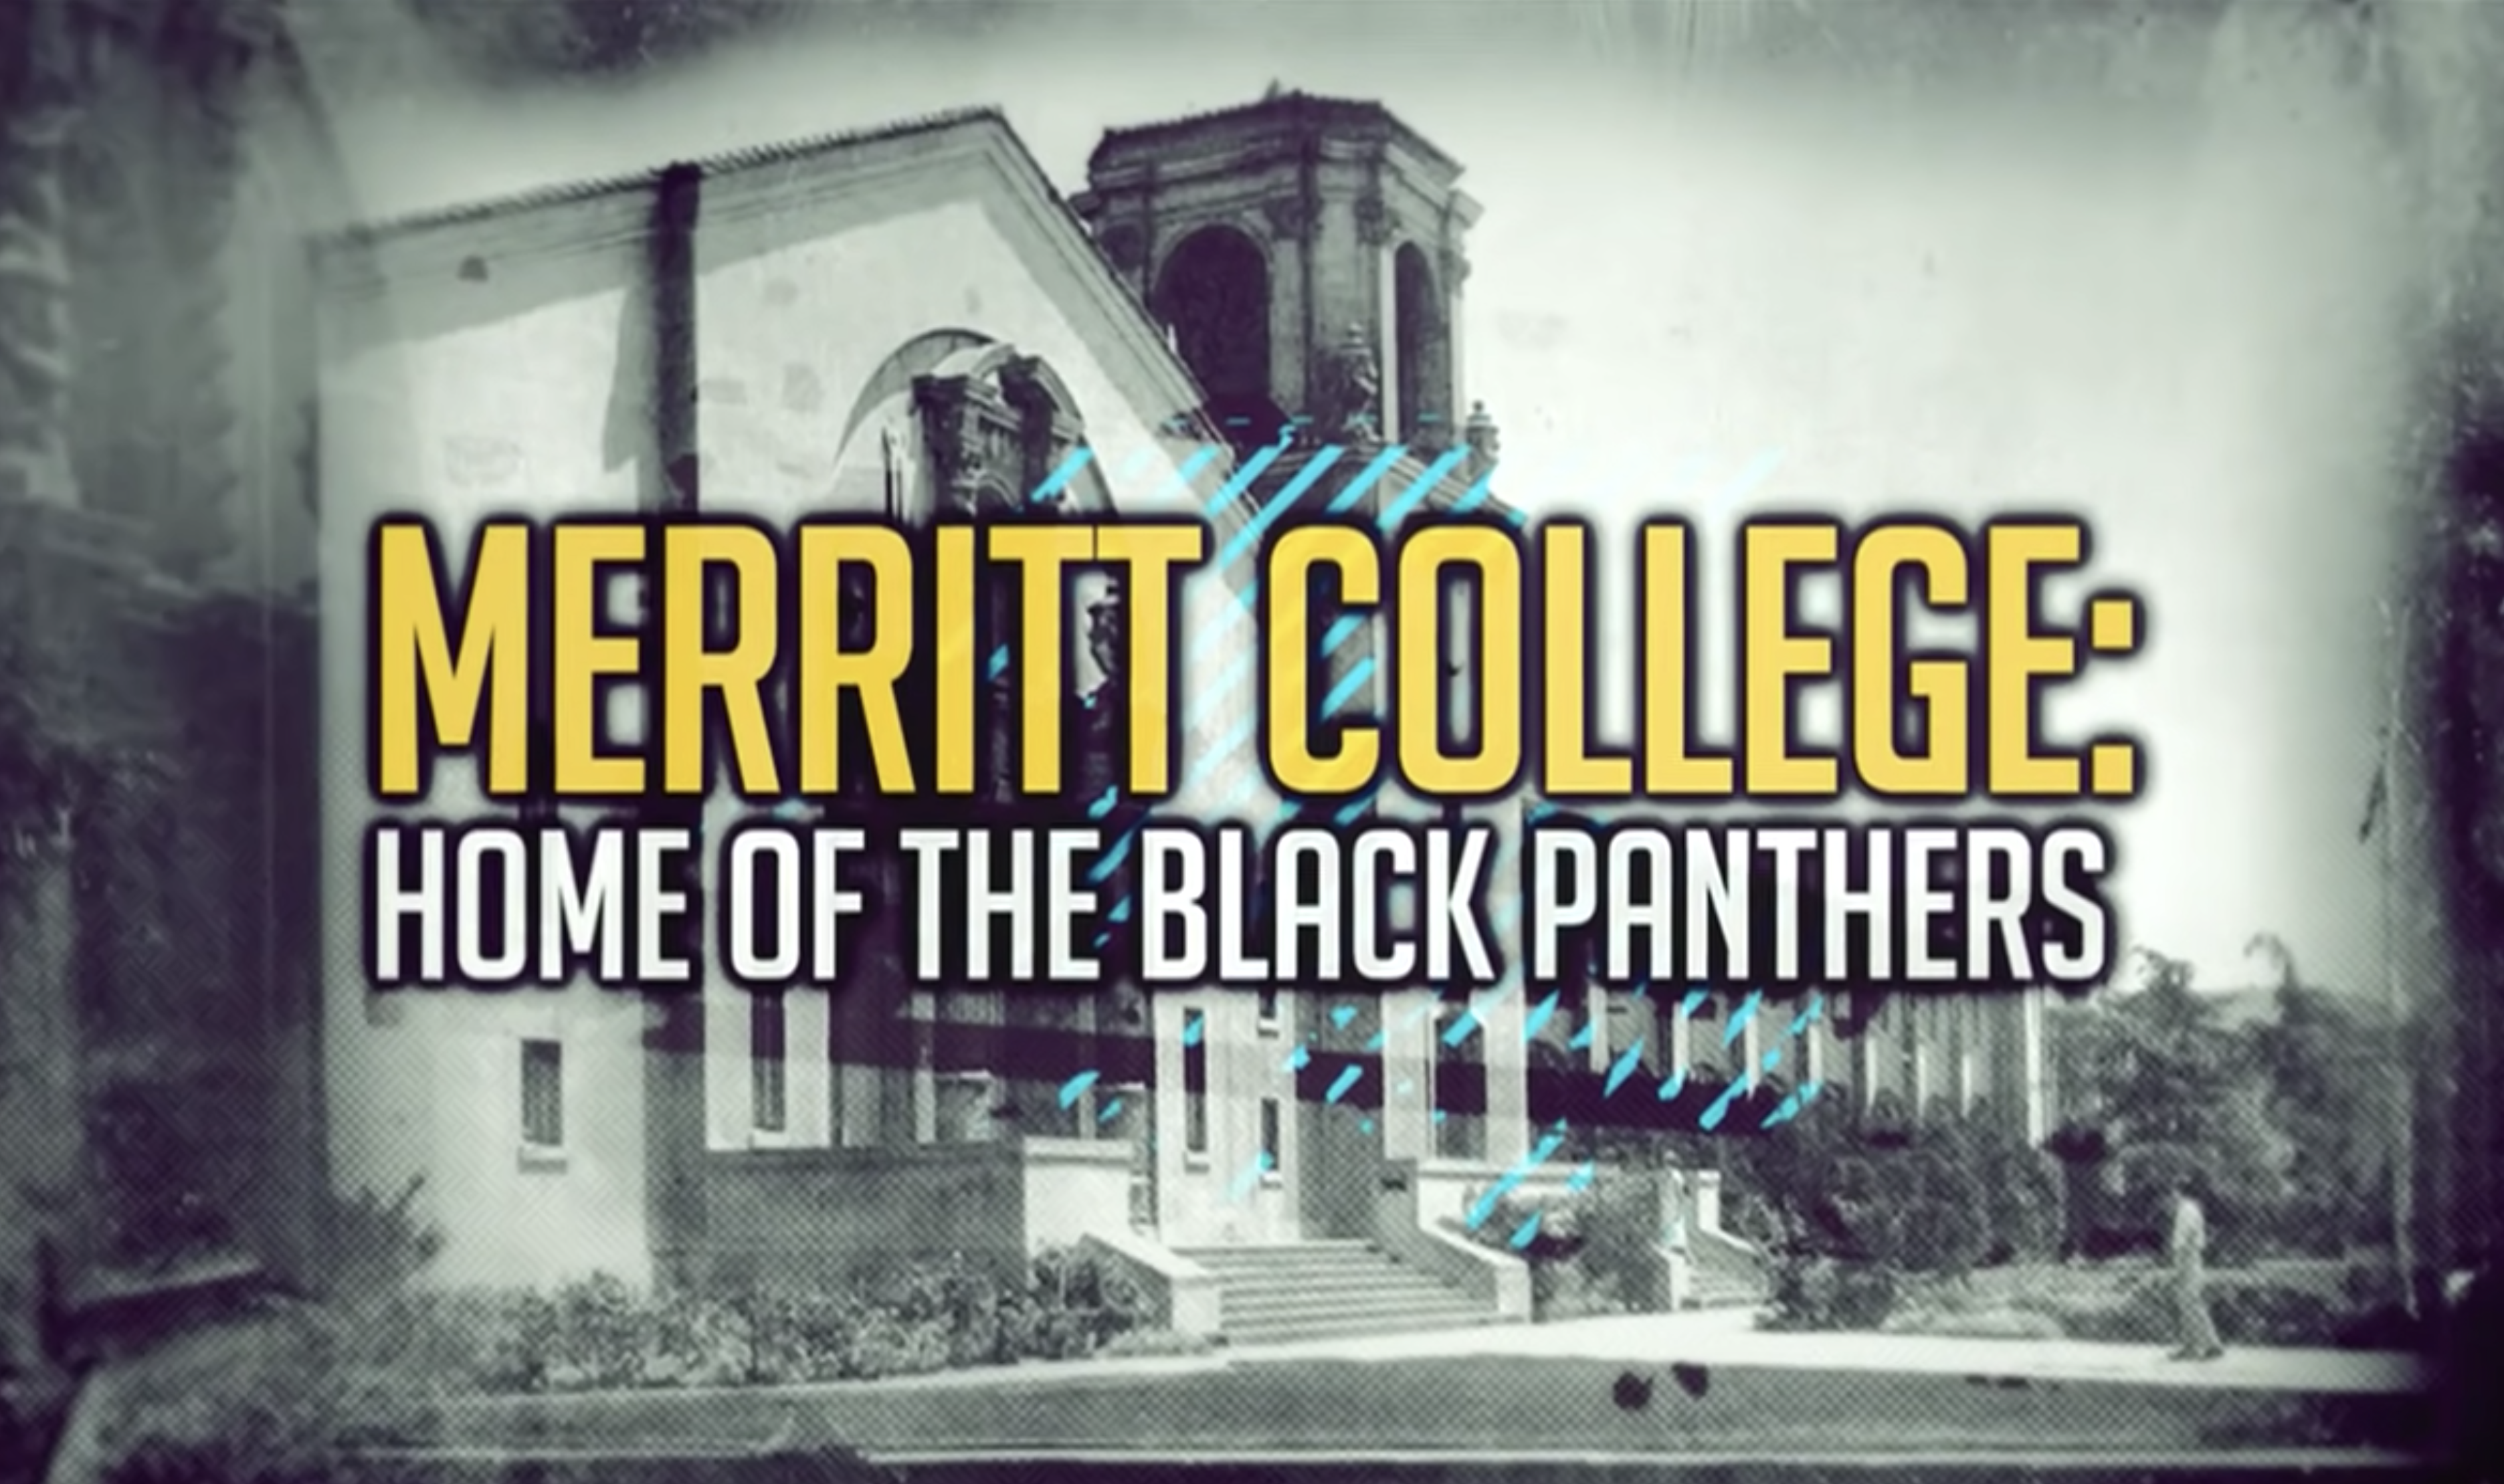 Merritt College: Home of the Black Panthers